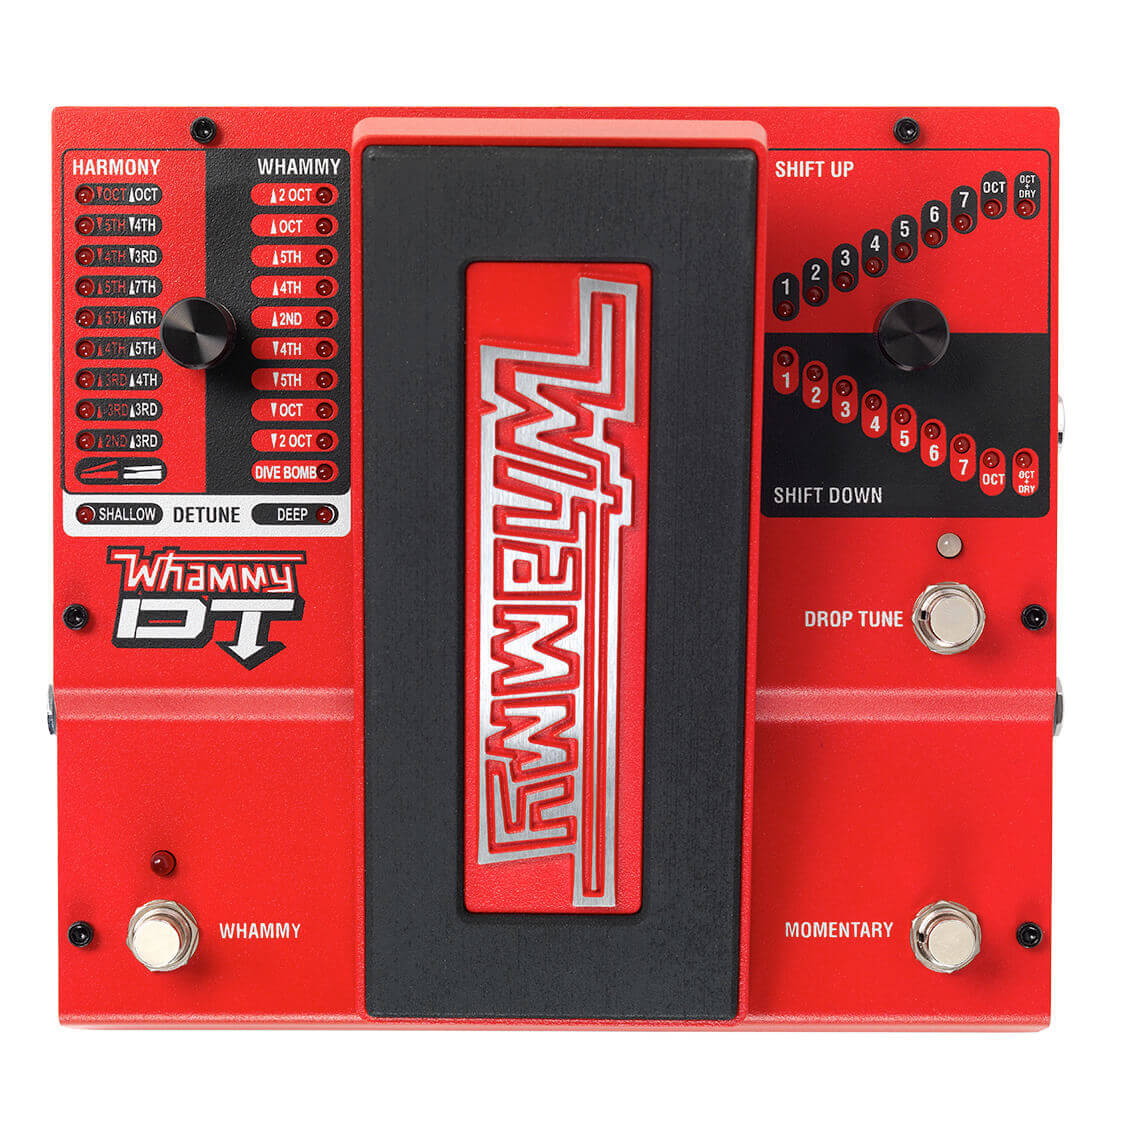 DigiTech whammy DT classic pitch shifting guitar pedal in red top view